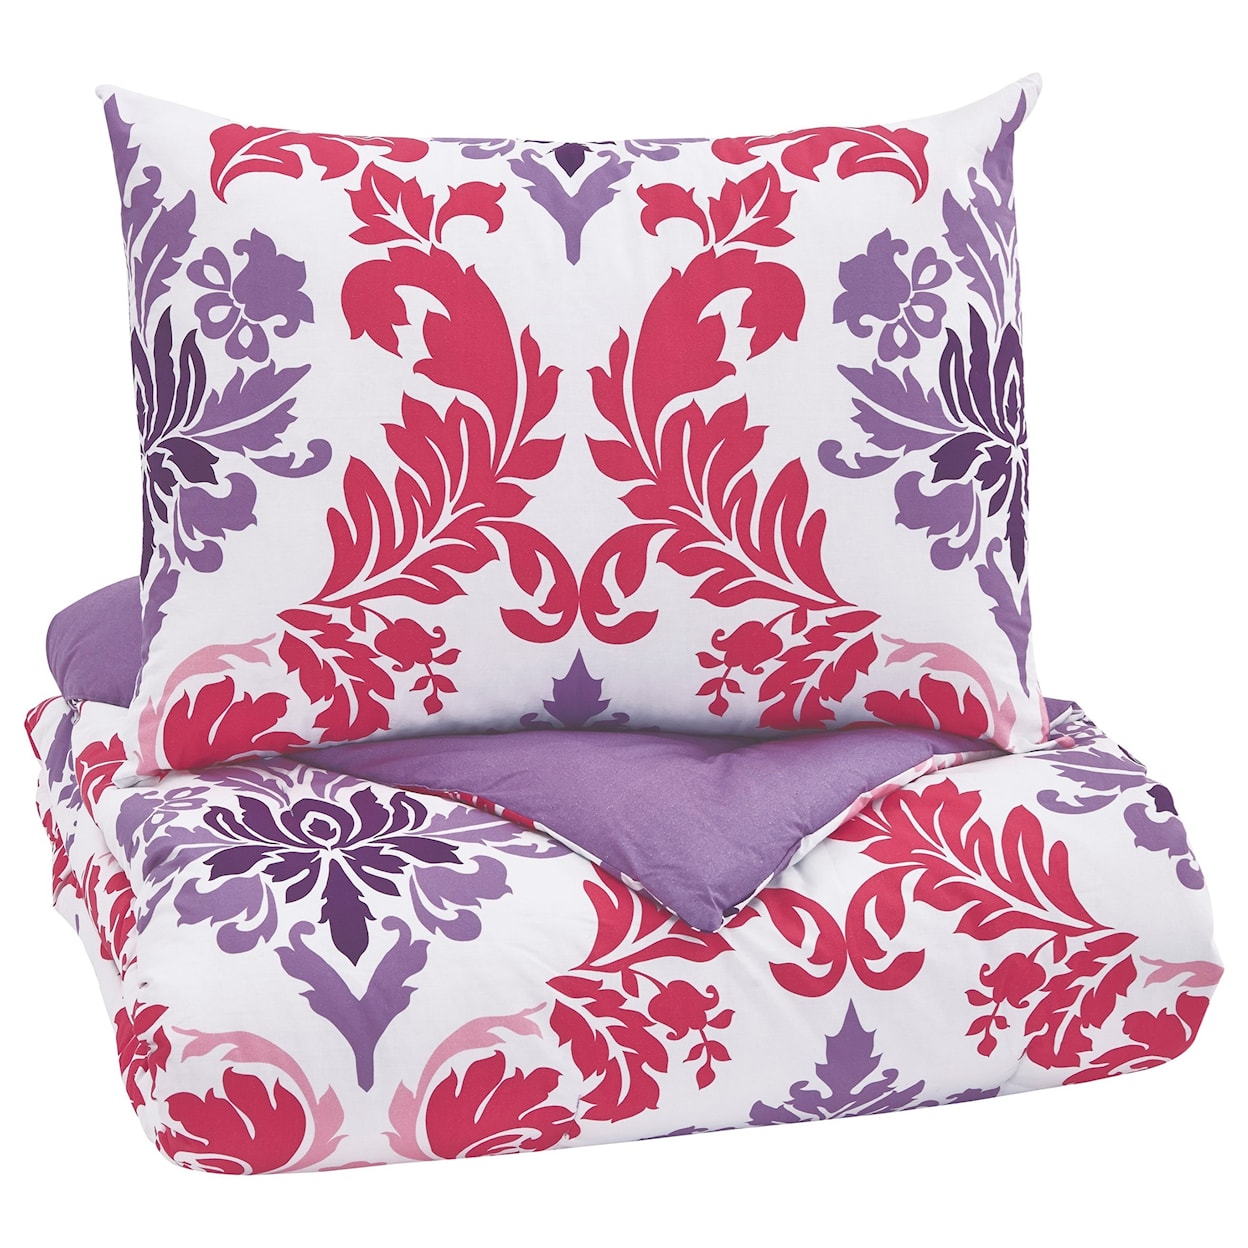 Signature Design by Ashley Bedding Sets Twin Ventress Berry Comforter Set